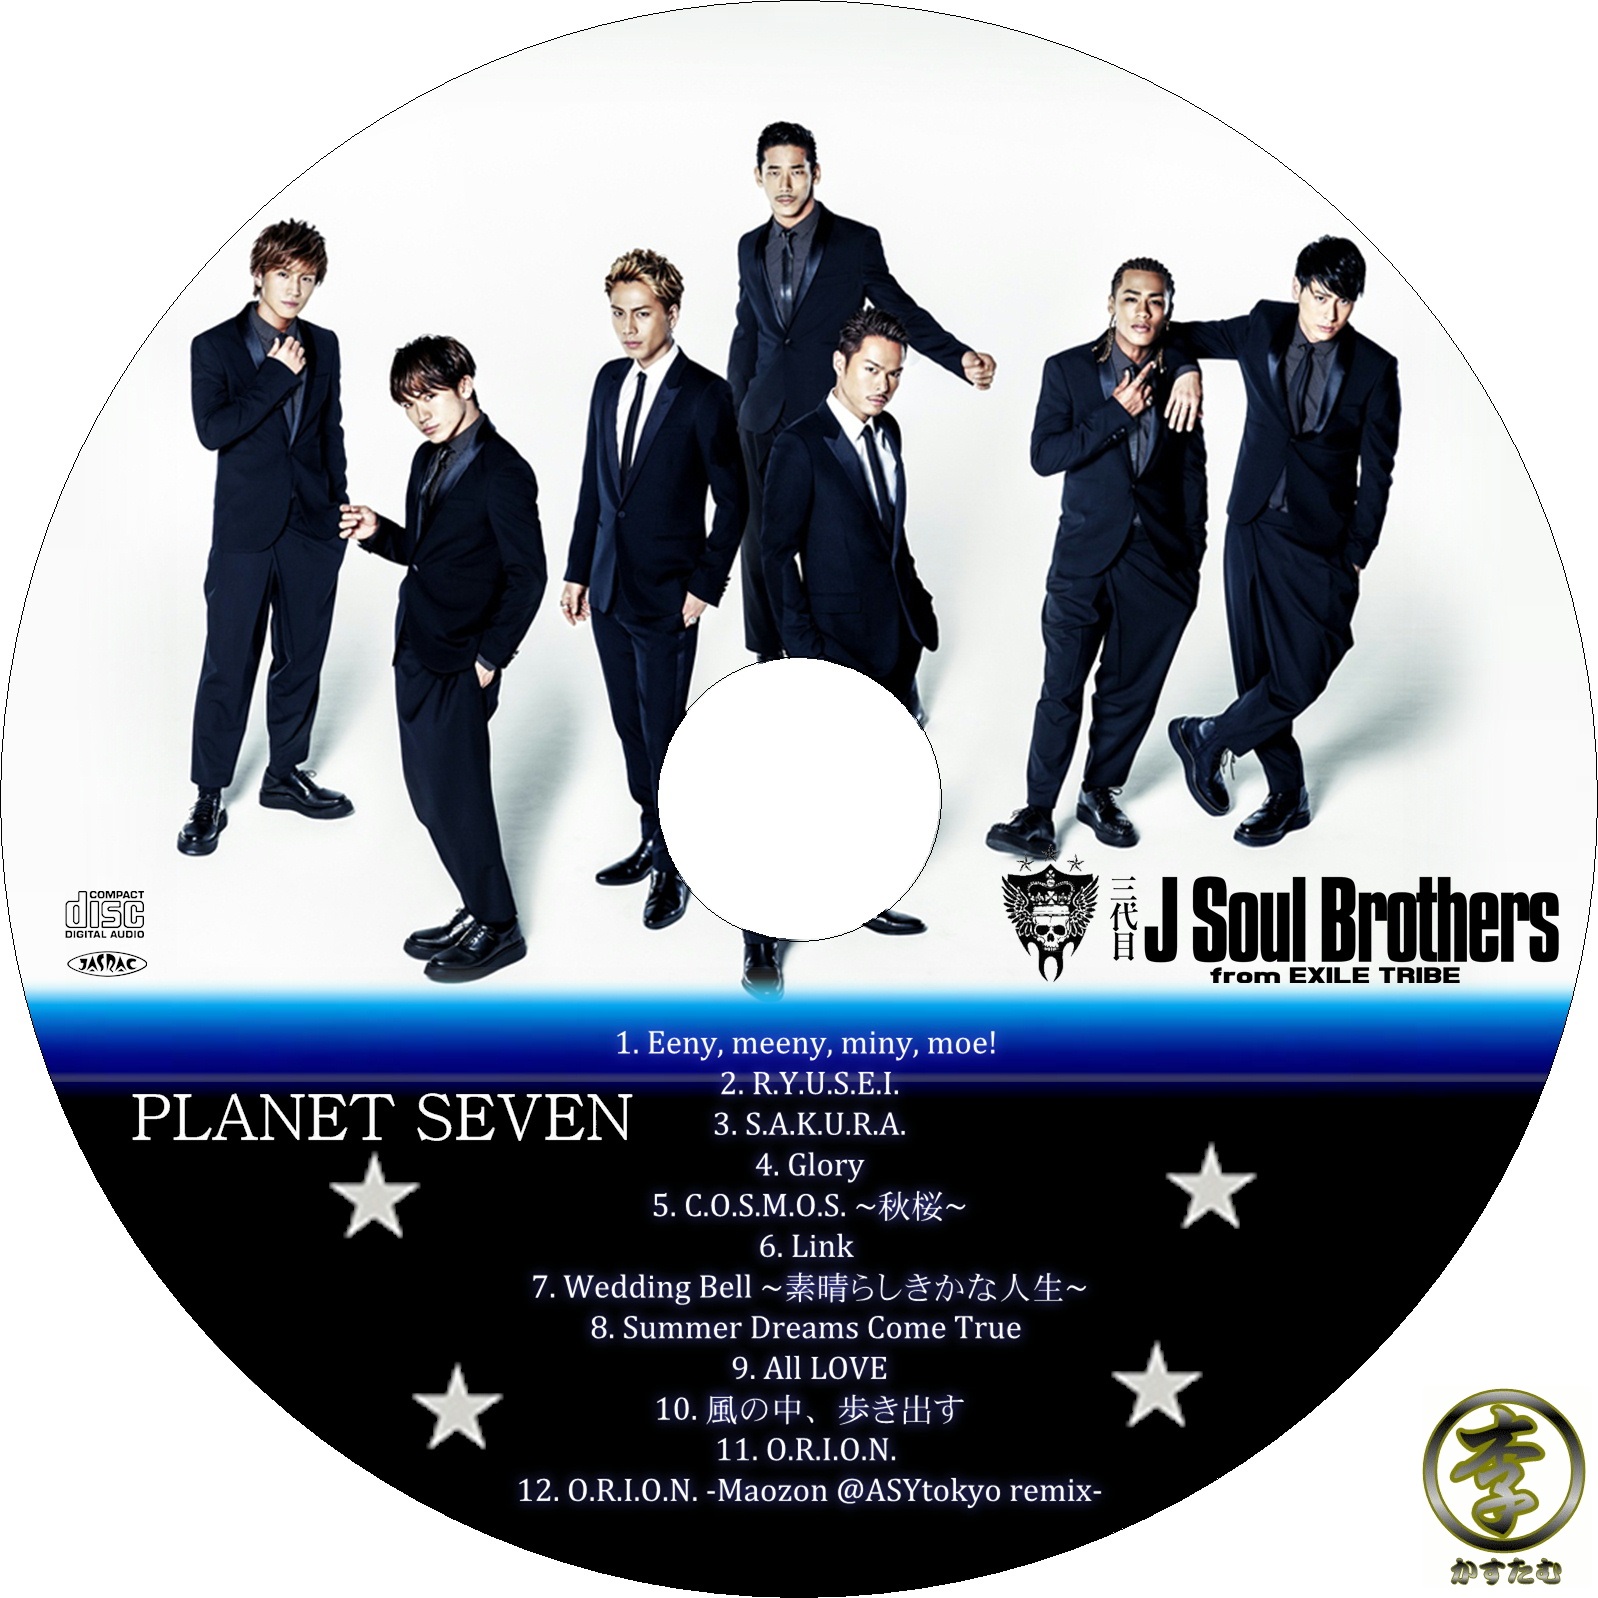 PLANET SEVEN 三代目J Soul Brothers CD DVD登坂広臣 - ミュージック